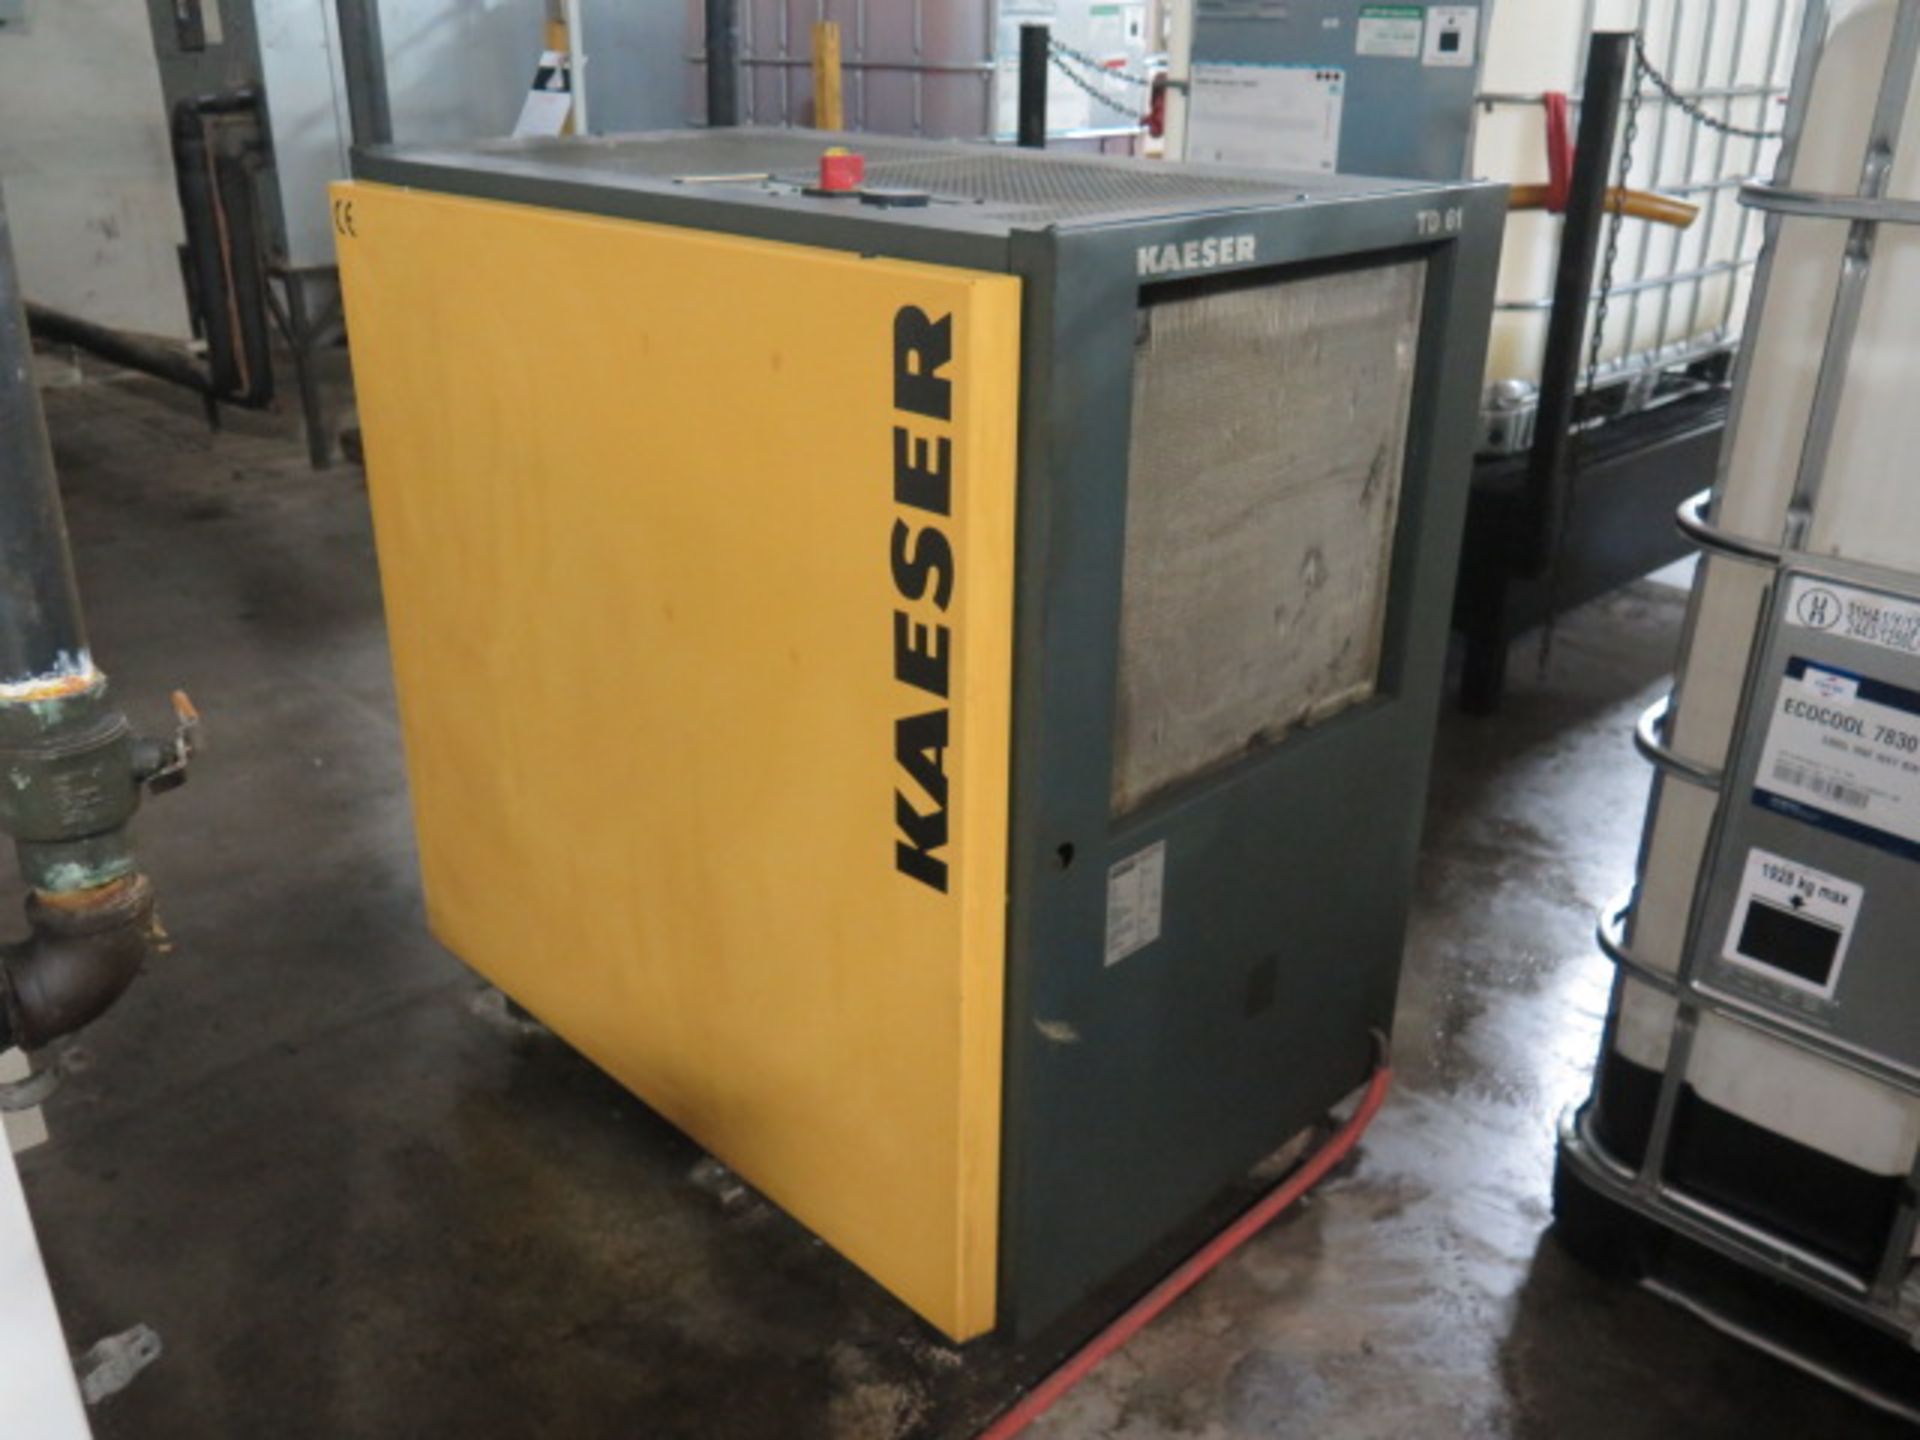 2005 Kaeser TD61 Refrigerated Air Dryer s/n 1187 (SOLD AS-IS - NO WARRANTY)